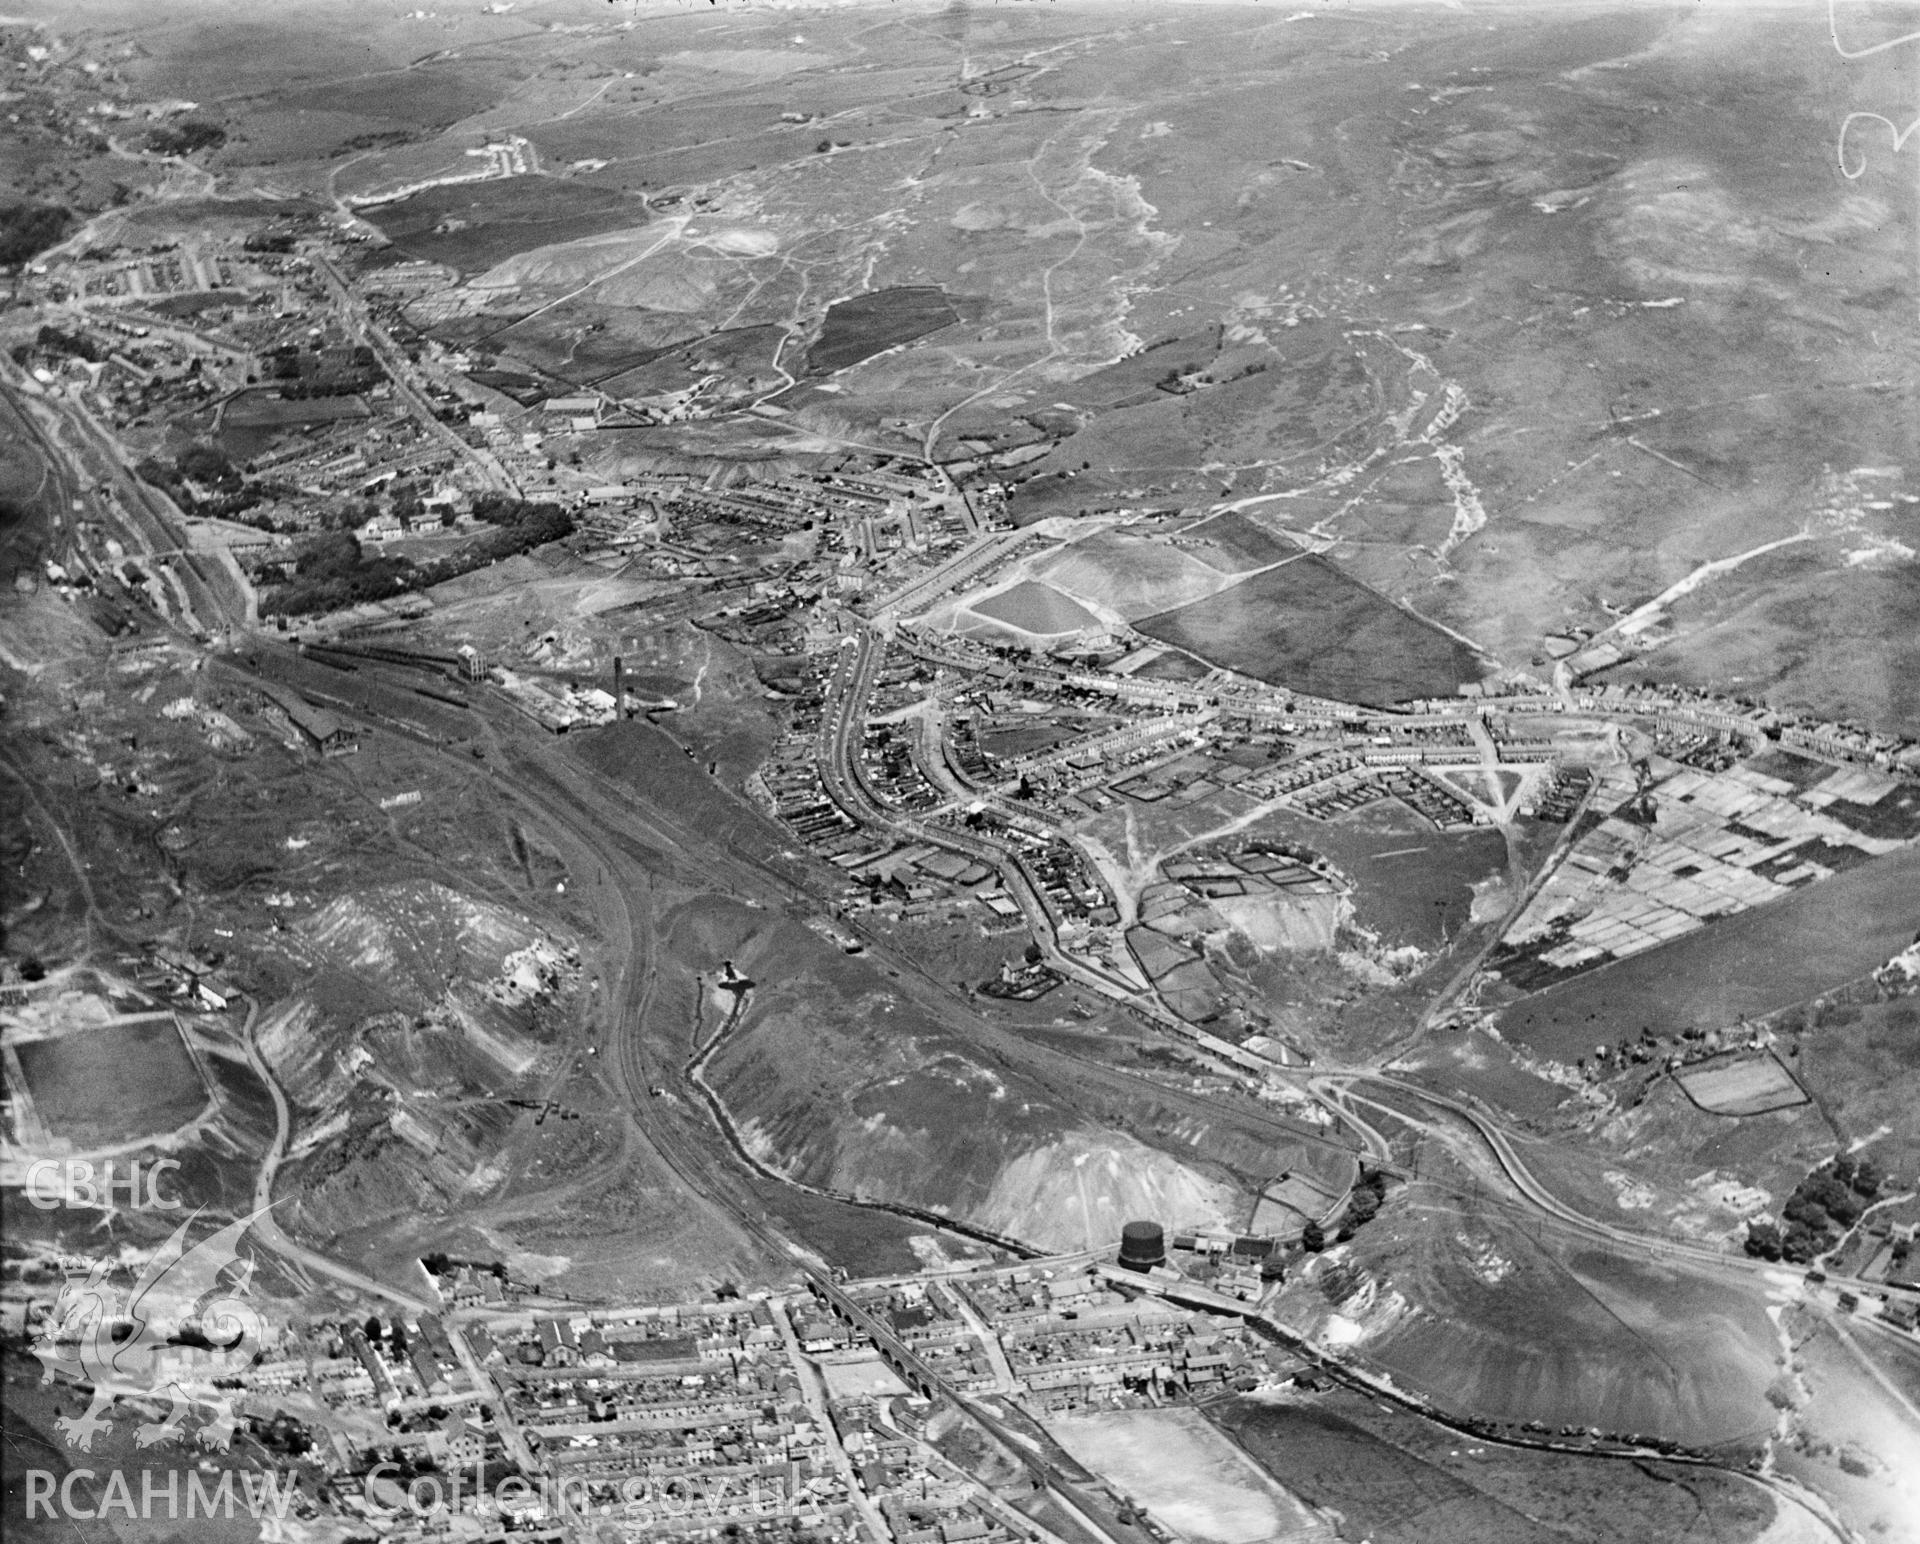 General view of Rhymney, oblique aerial view. 5?x4? black and white glass plate negative.